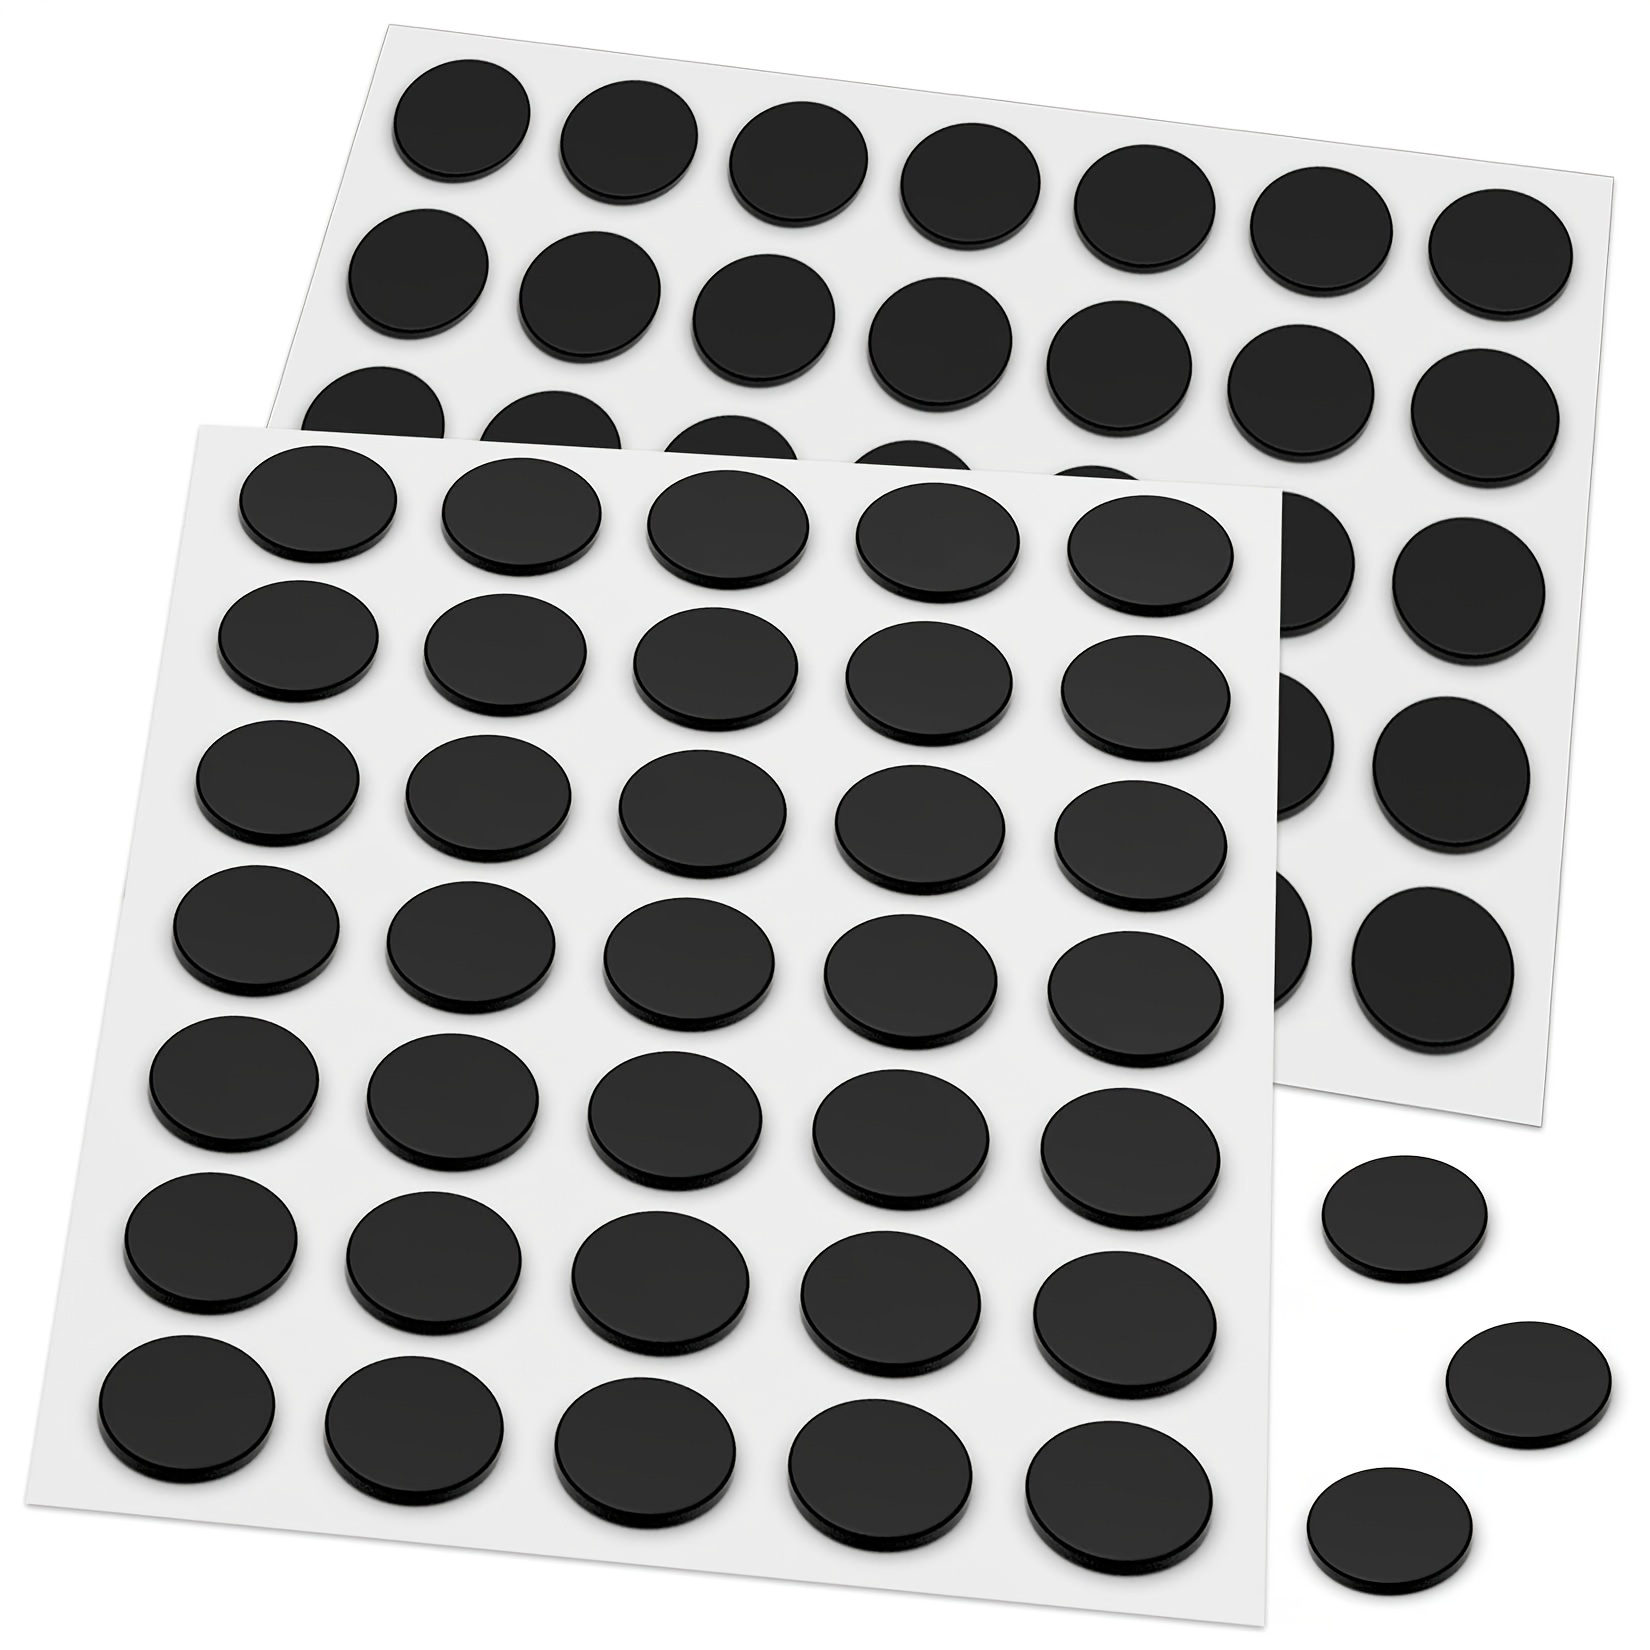  Magnetic Dots - Self Adhesive Magnet Dots (0.8 x 0.8) - Peel  & Stick Magnetic Circles - Industrial Flexible Sticky Magnets - Sheets is  Alternative, Stickers, Strip and Magnetic Tape (120